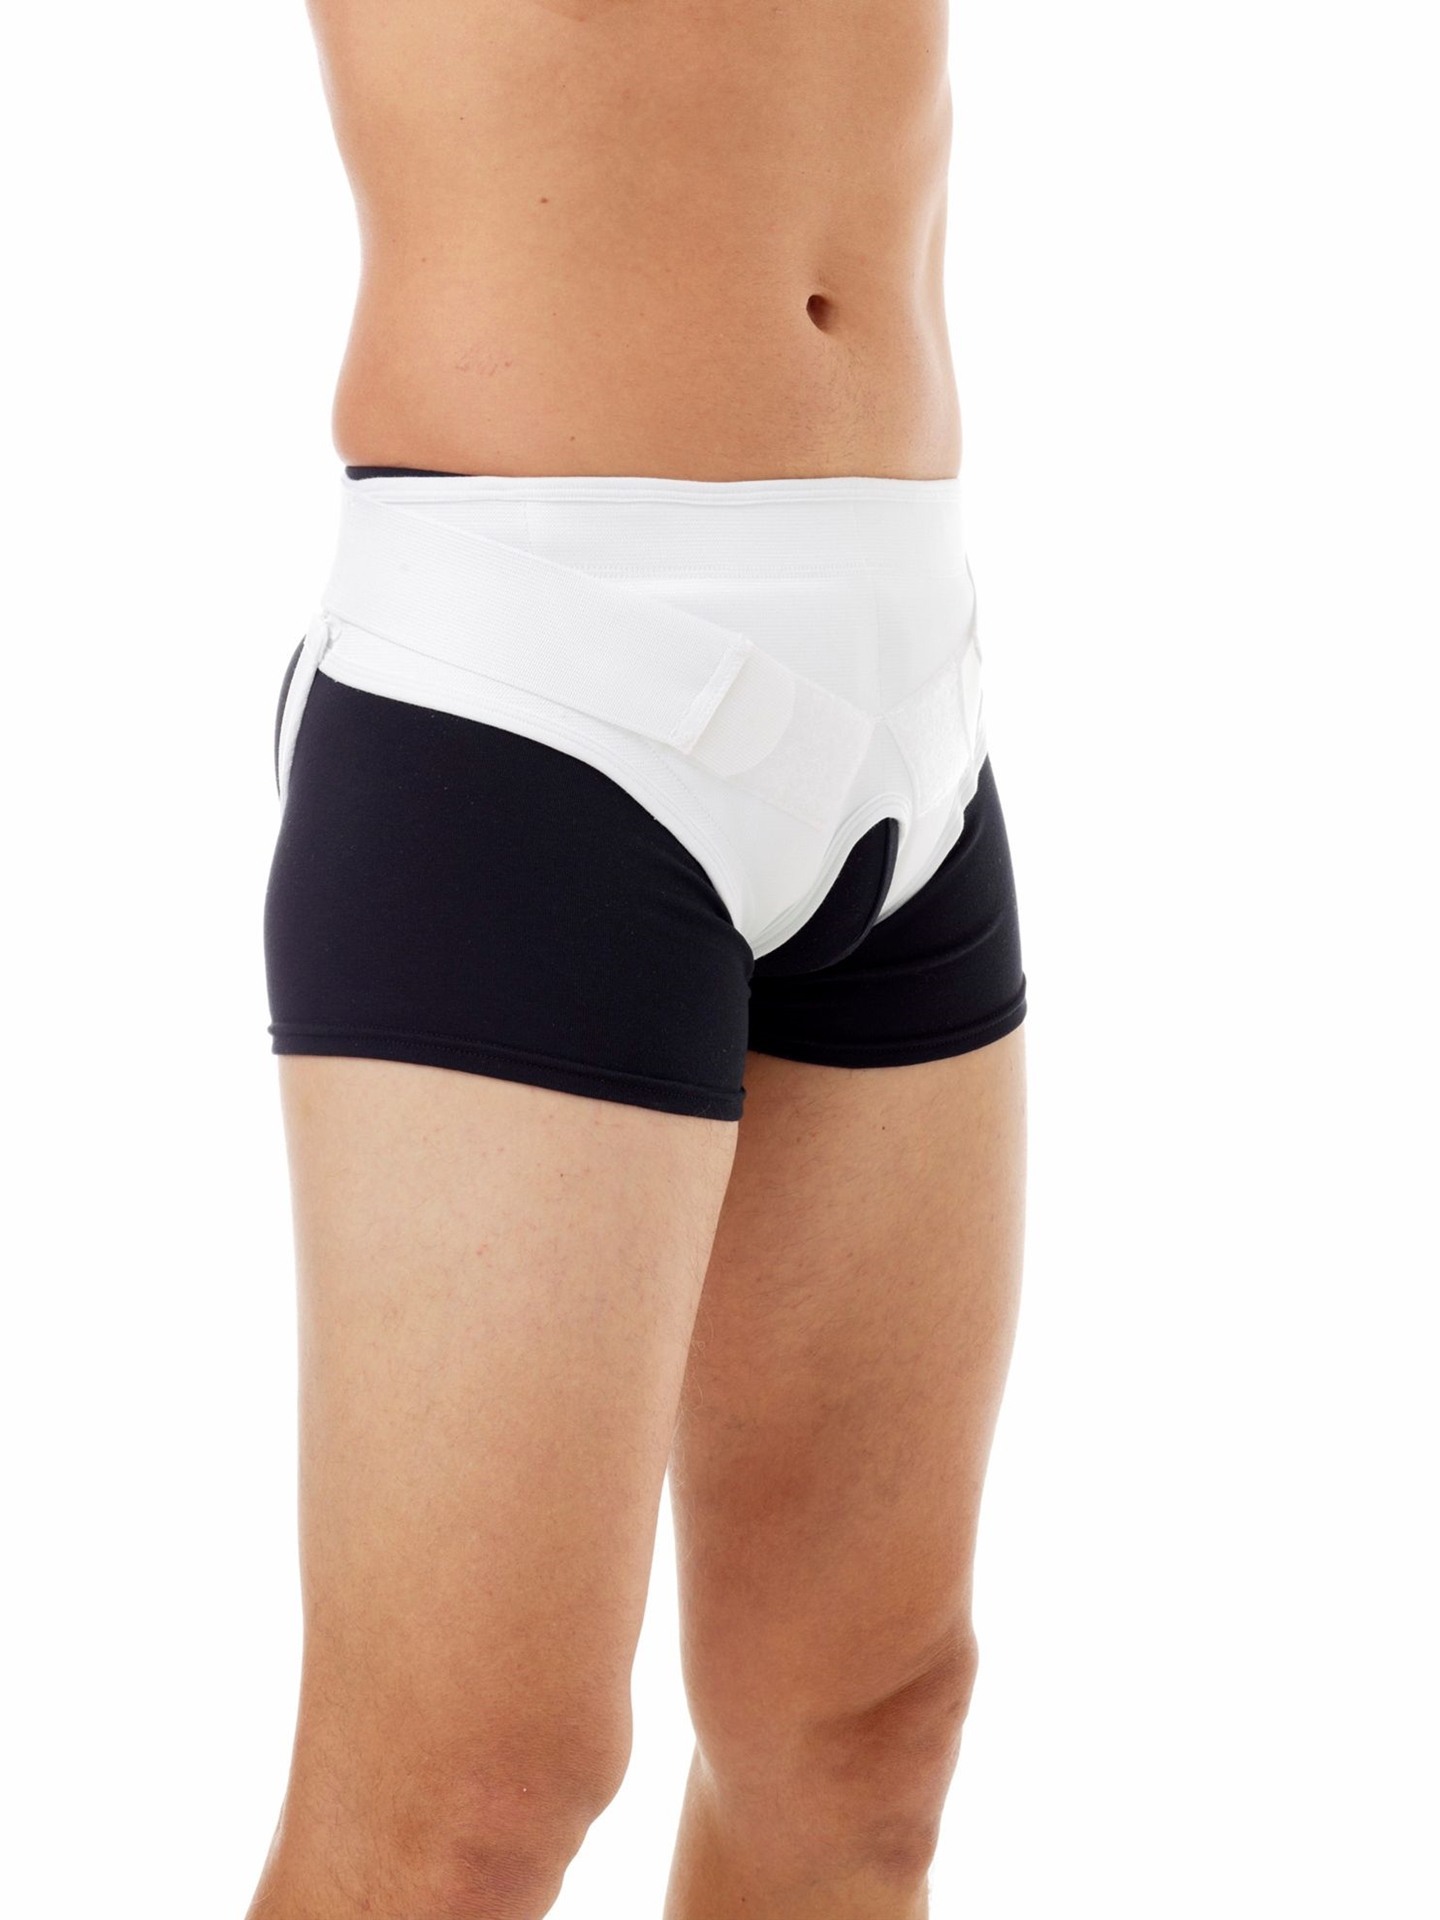 https://www.underworks.com/images/thumbs/0002189_unisex-inguinal-hernia-support-brace-with-hot-cold-therapy-gel-pads.jpeg